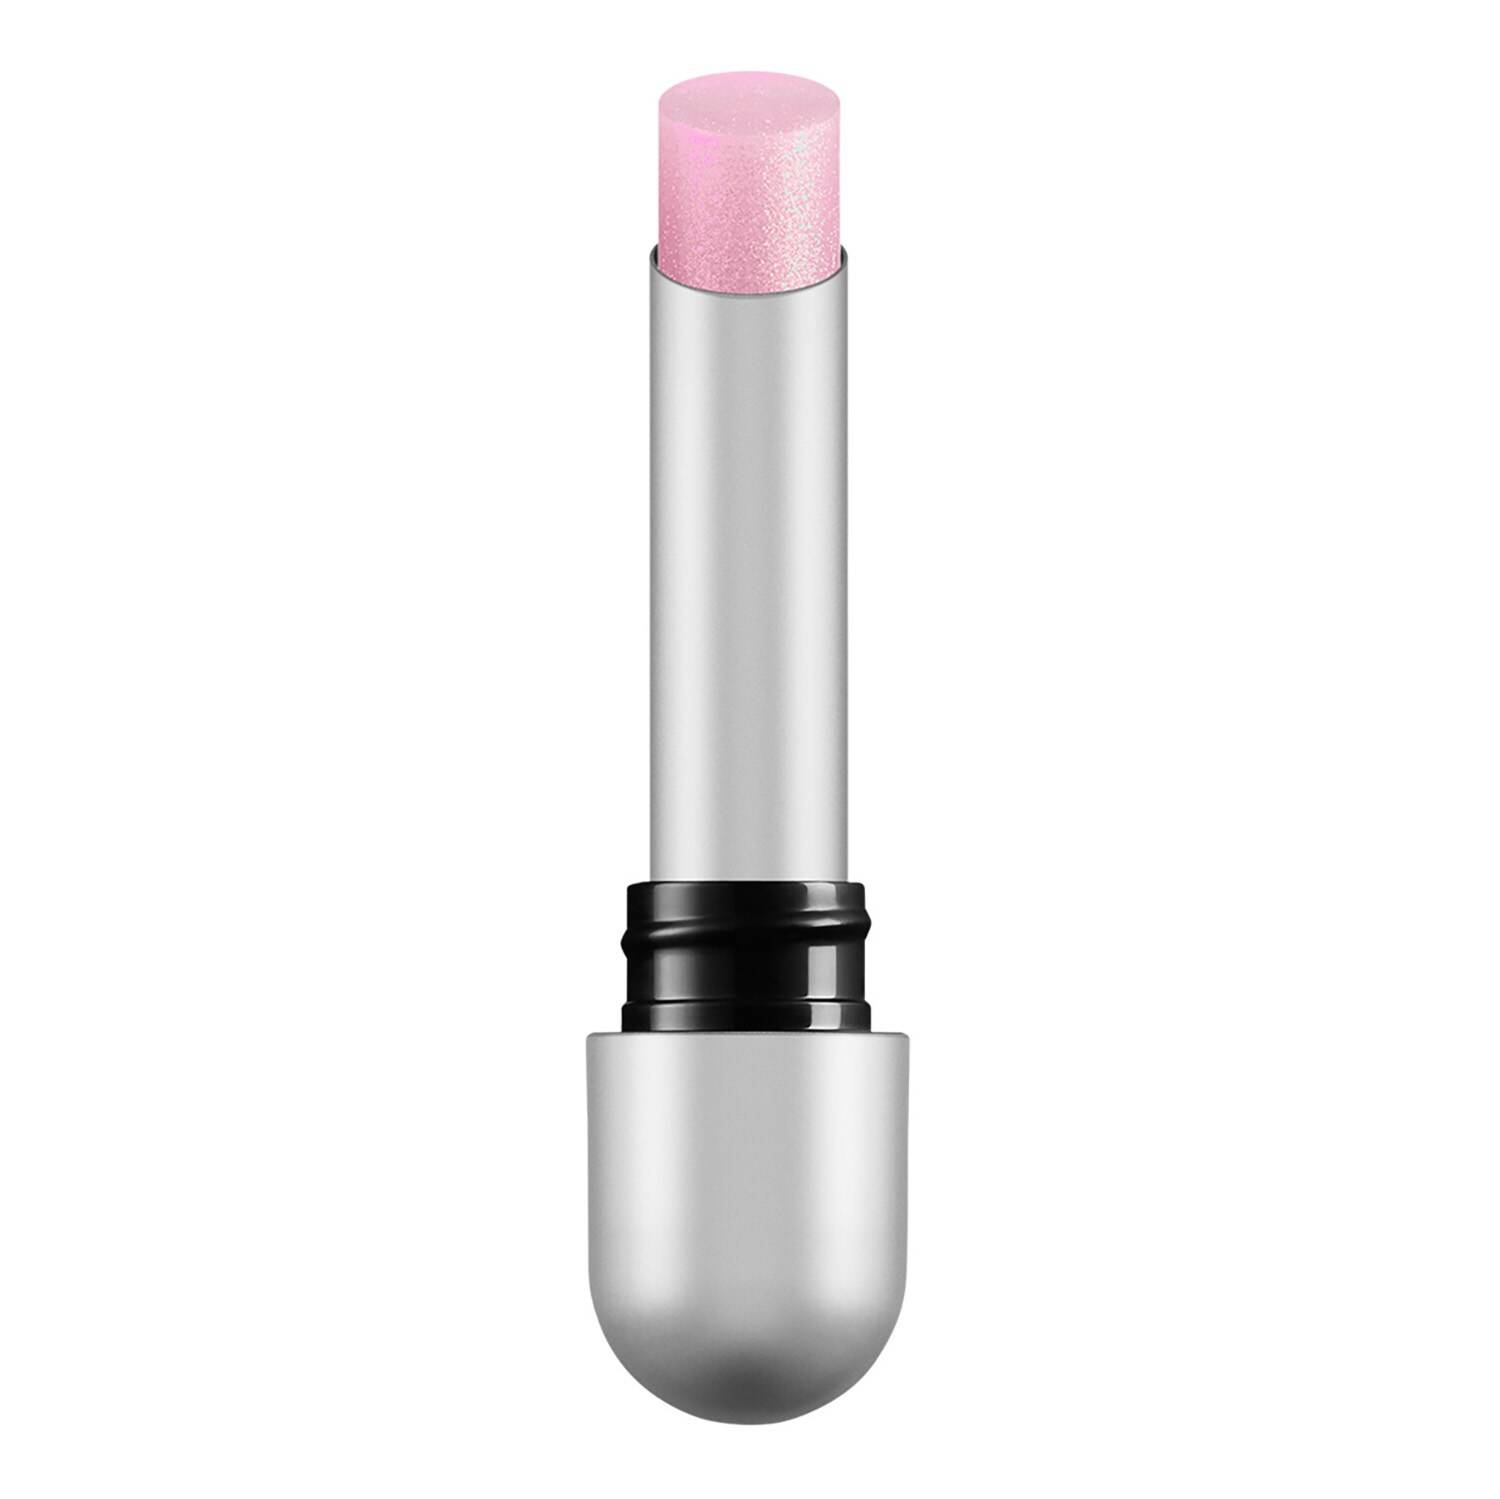 Rem Beauty Everything Nice Lip Balm 2.5G Clear